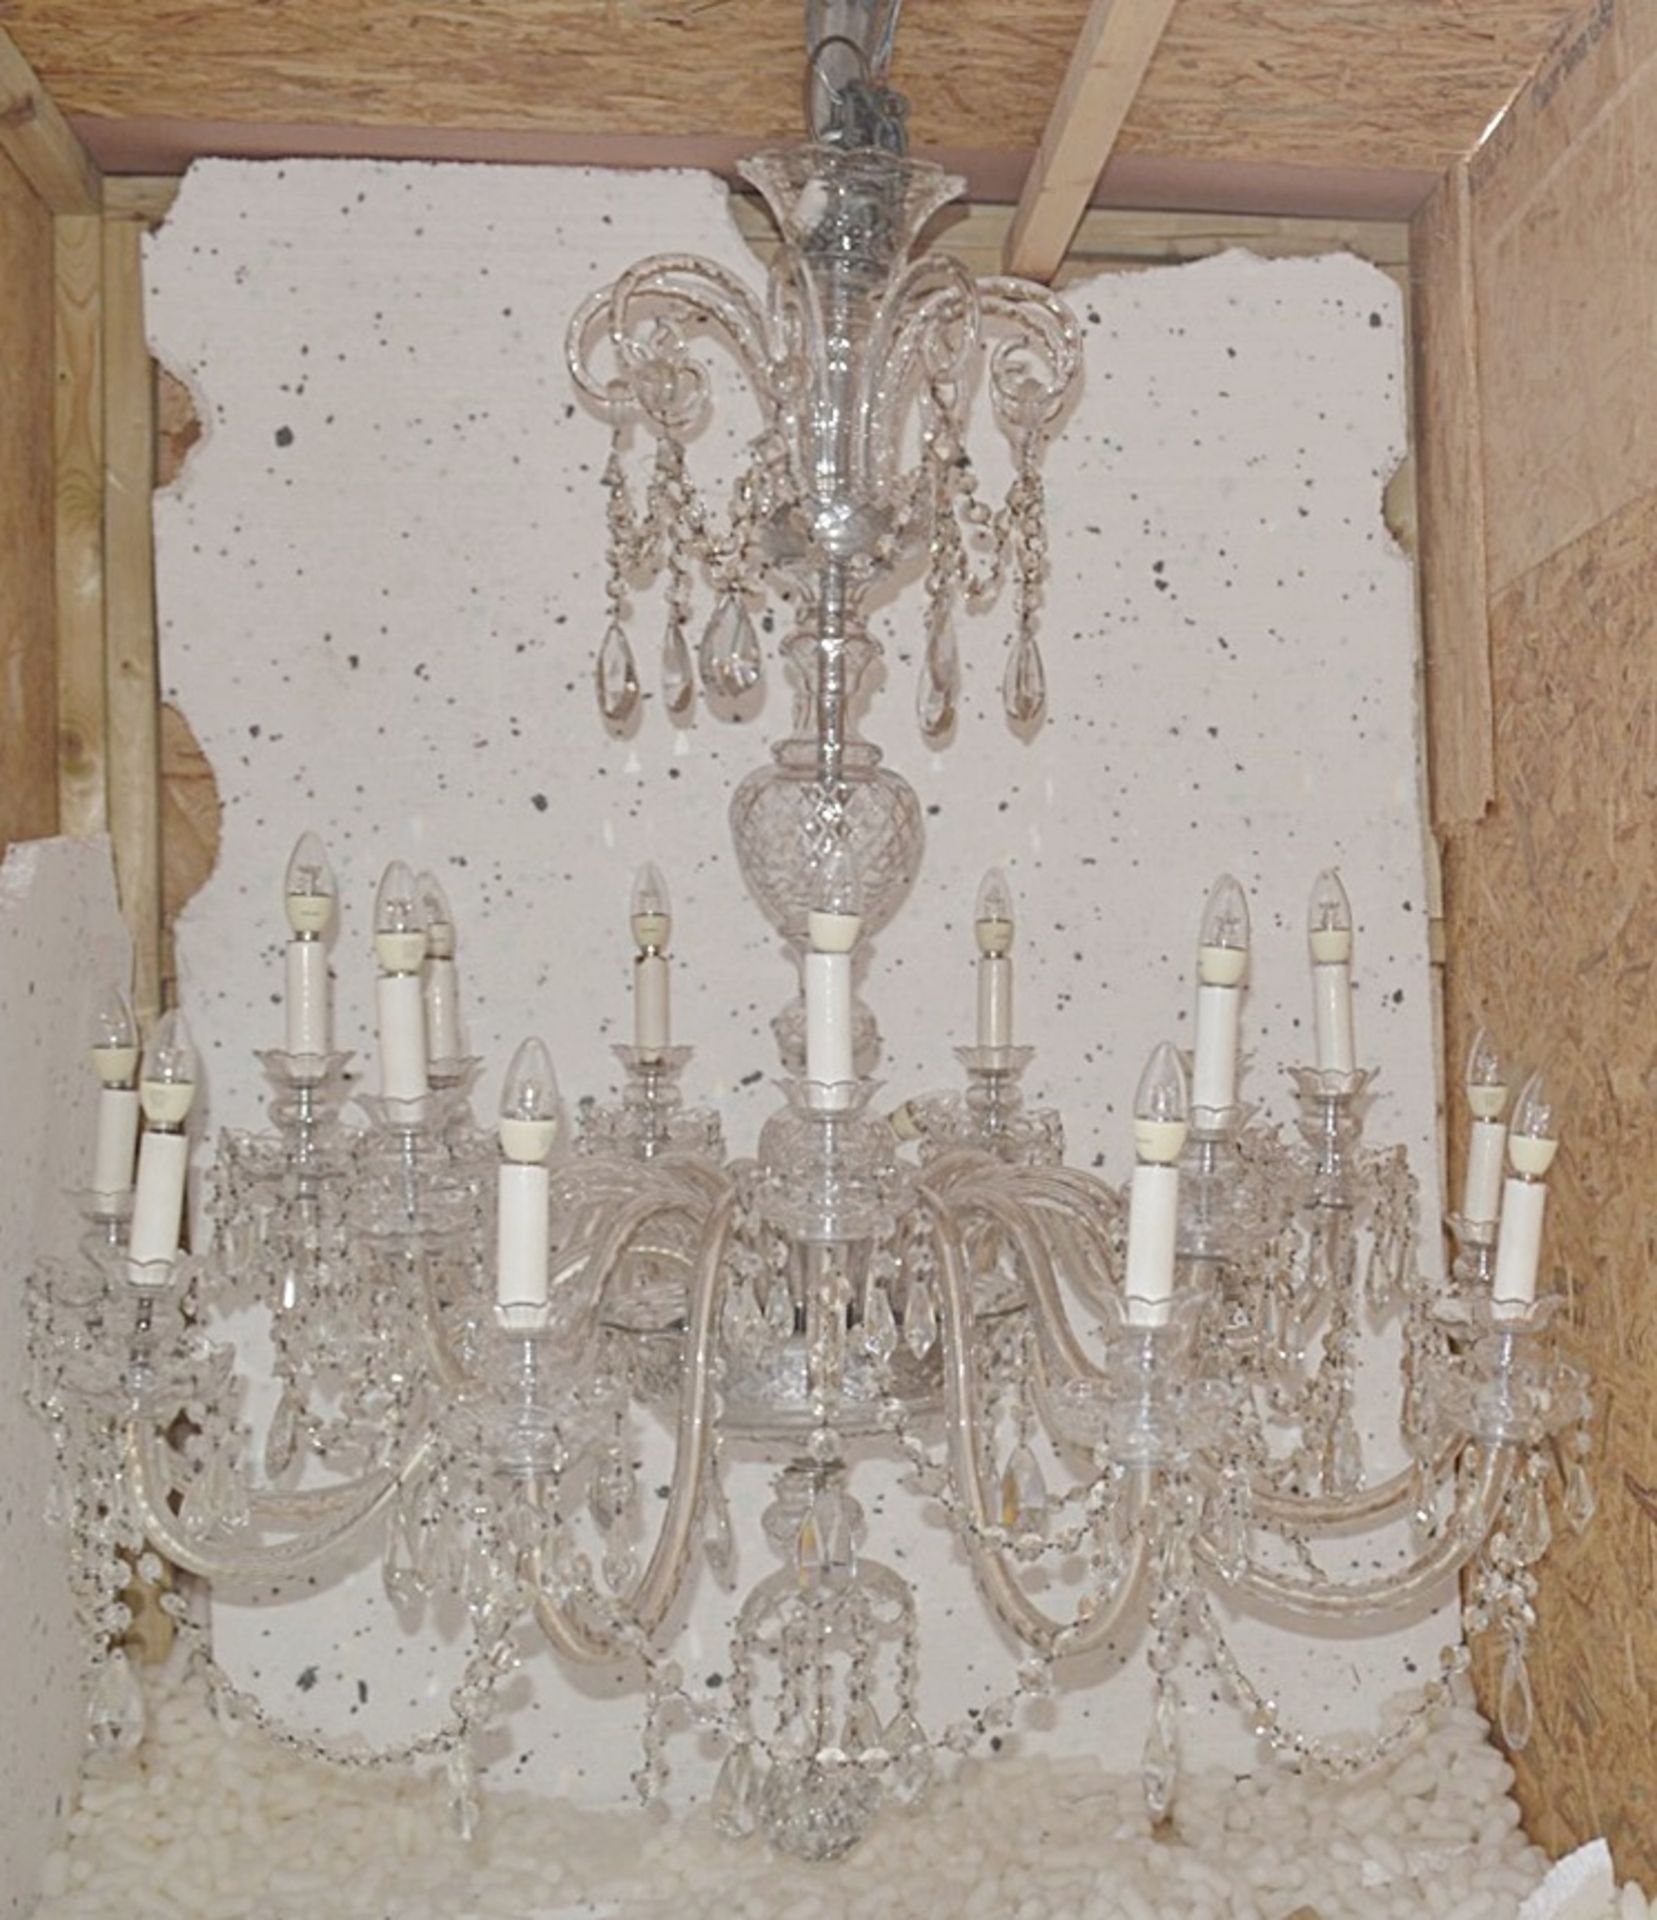 1 x Huge Commercial Ornate Georgian-Style Glass Chandelier - Dimensions: Height 150 x Diameter 125cm - Image 2 of 8